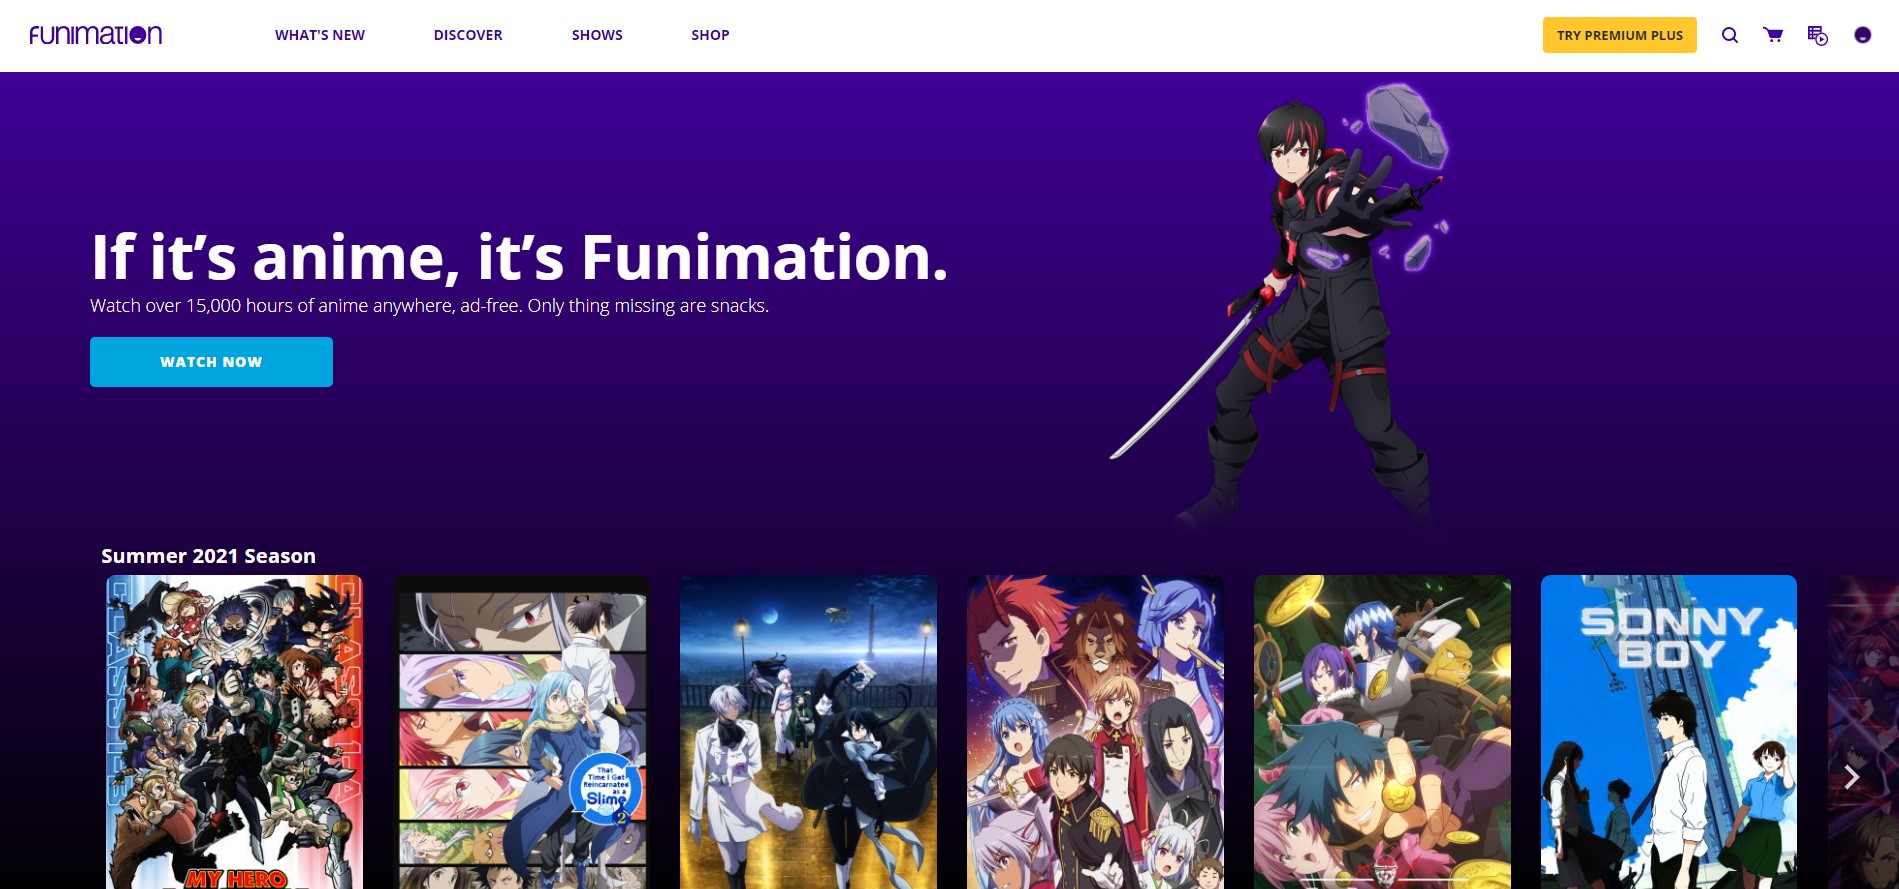 Funimation free trial is one available and how to get it? Beginner Tech